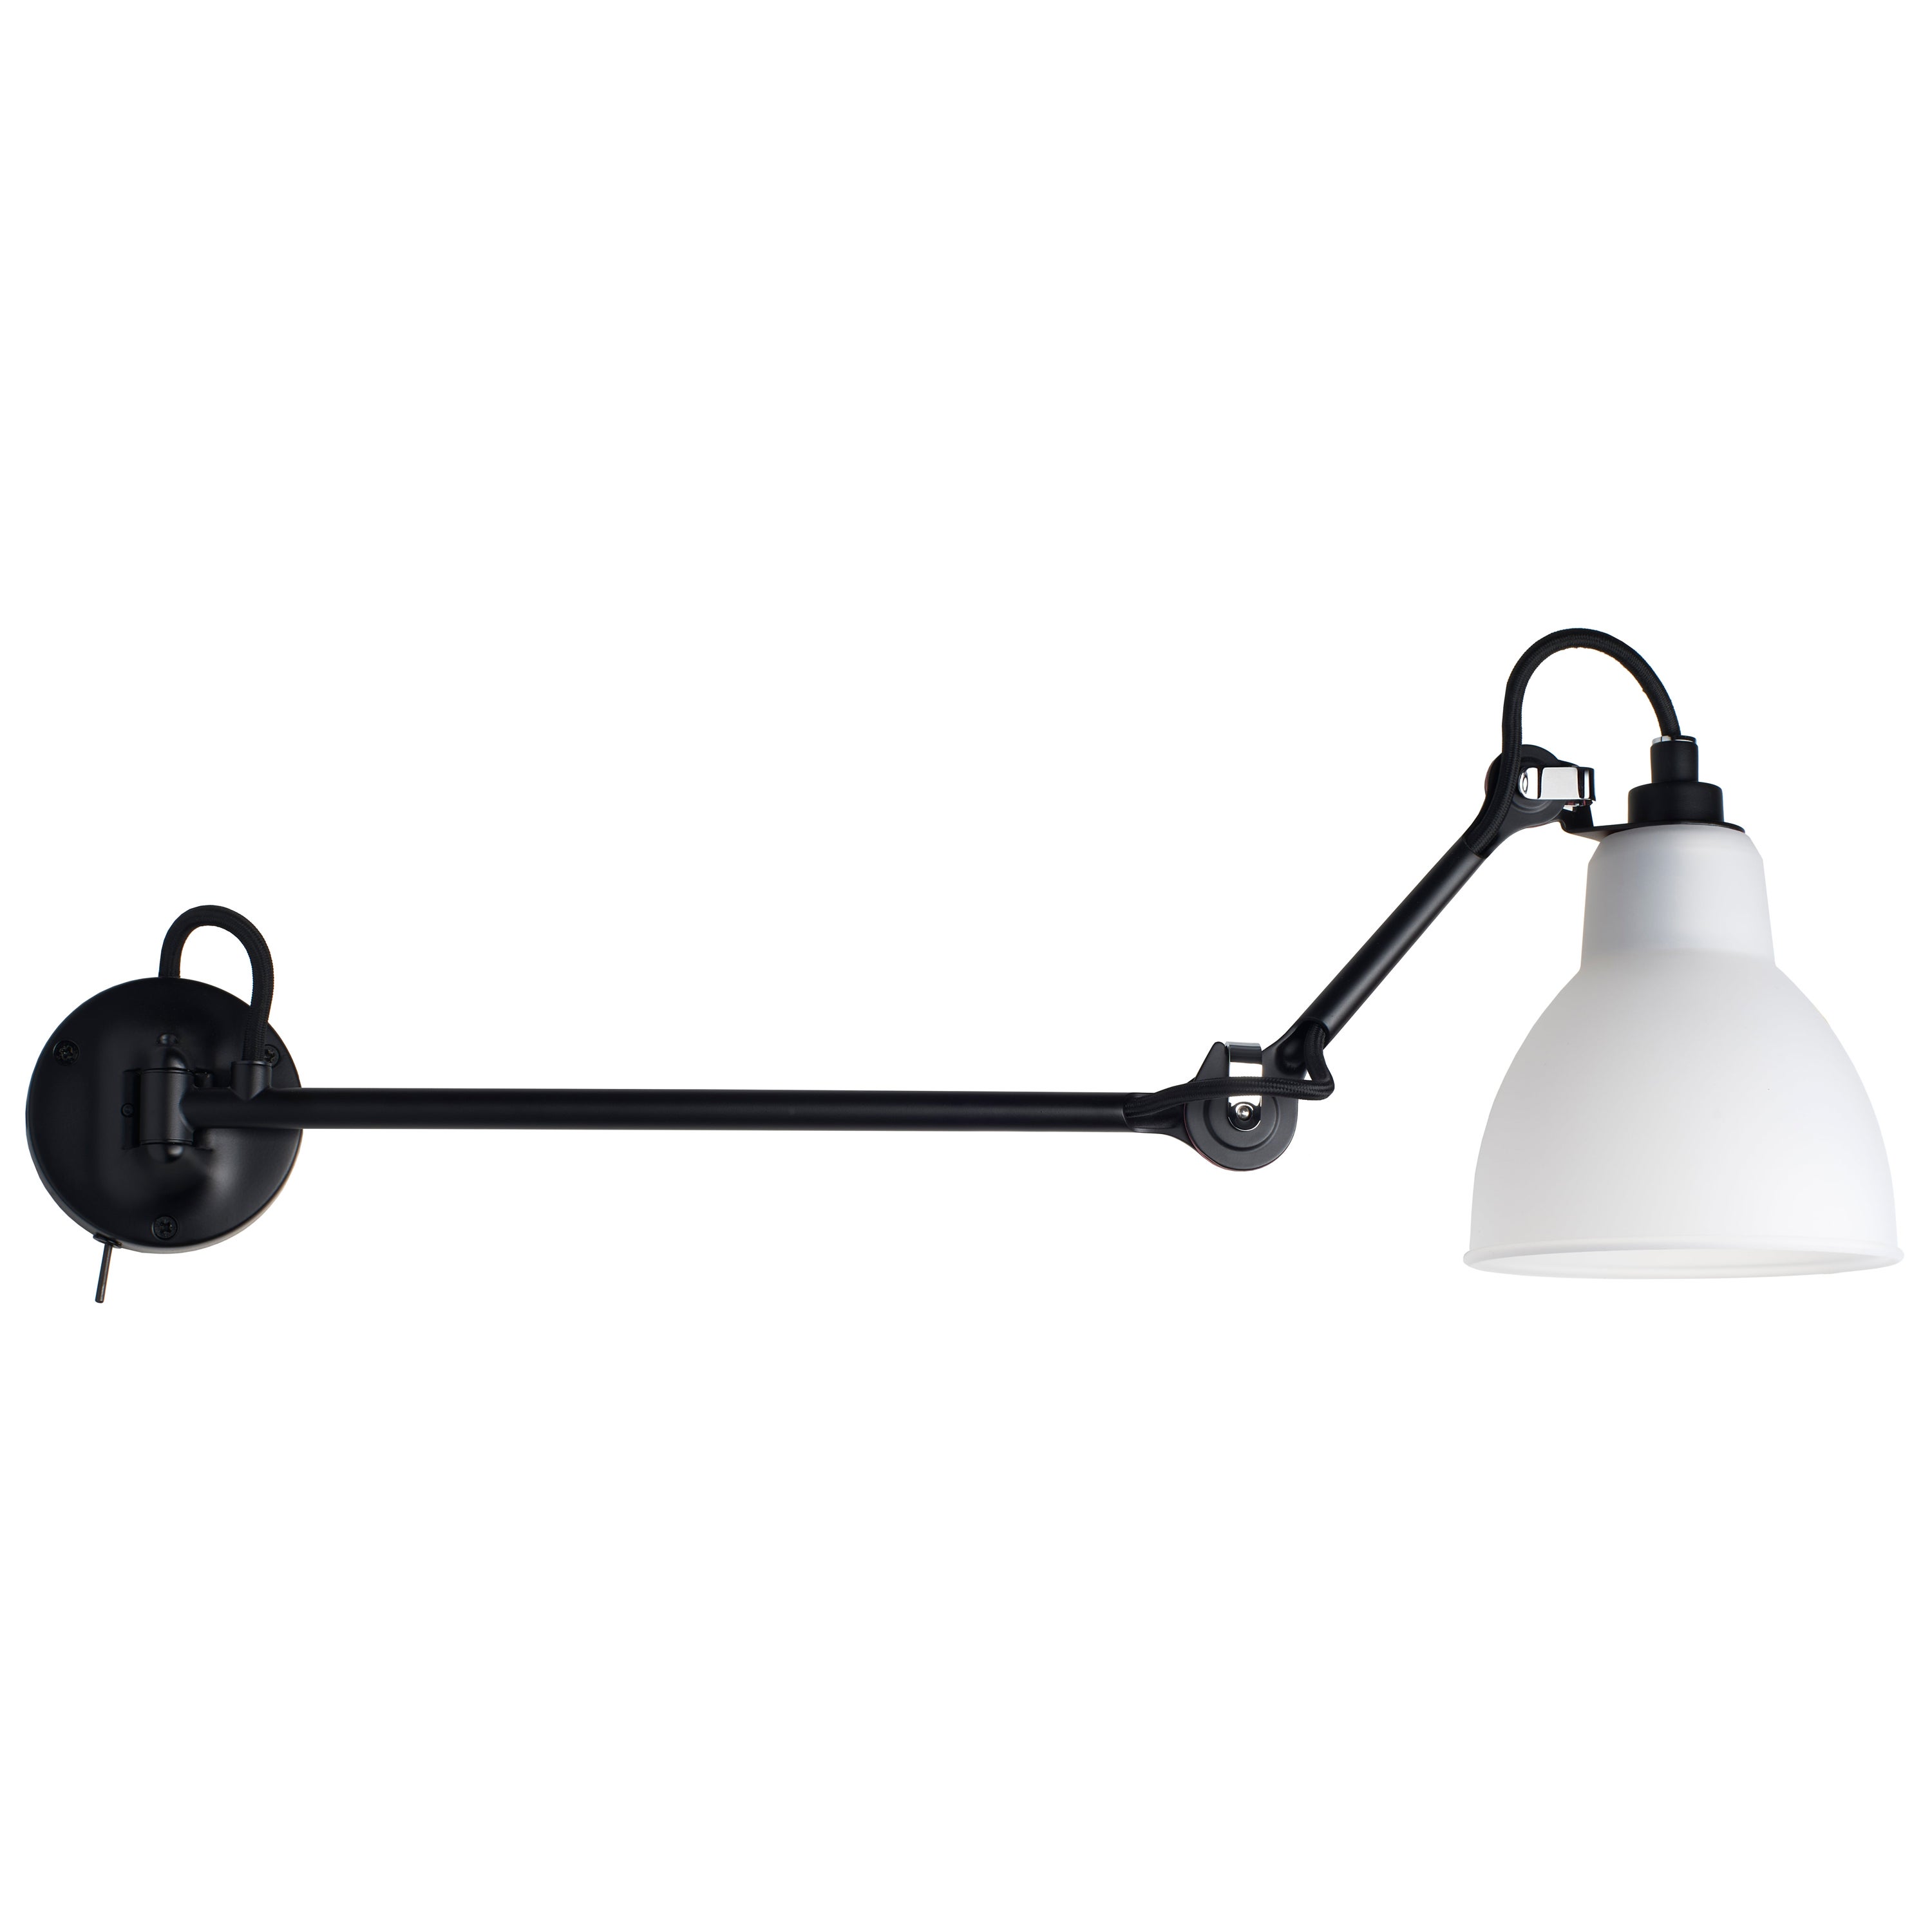 DCW Editions La Lampe Gras N°204 L40 SW Wall Lamp in Black & Polycarbonate Shade